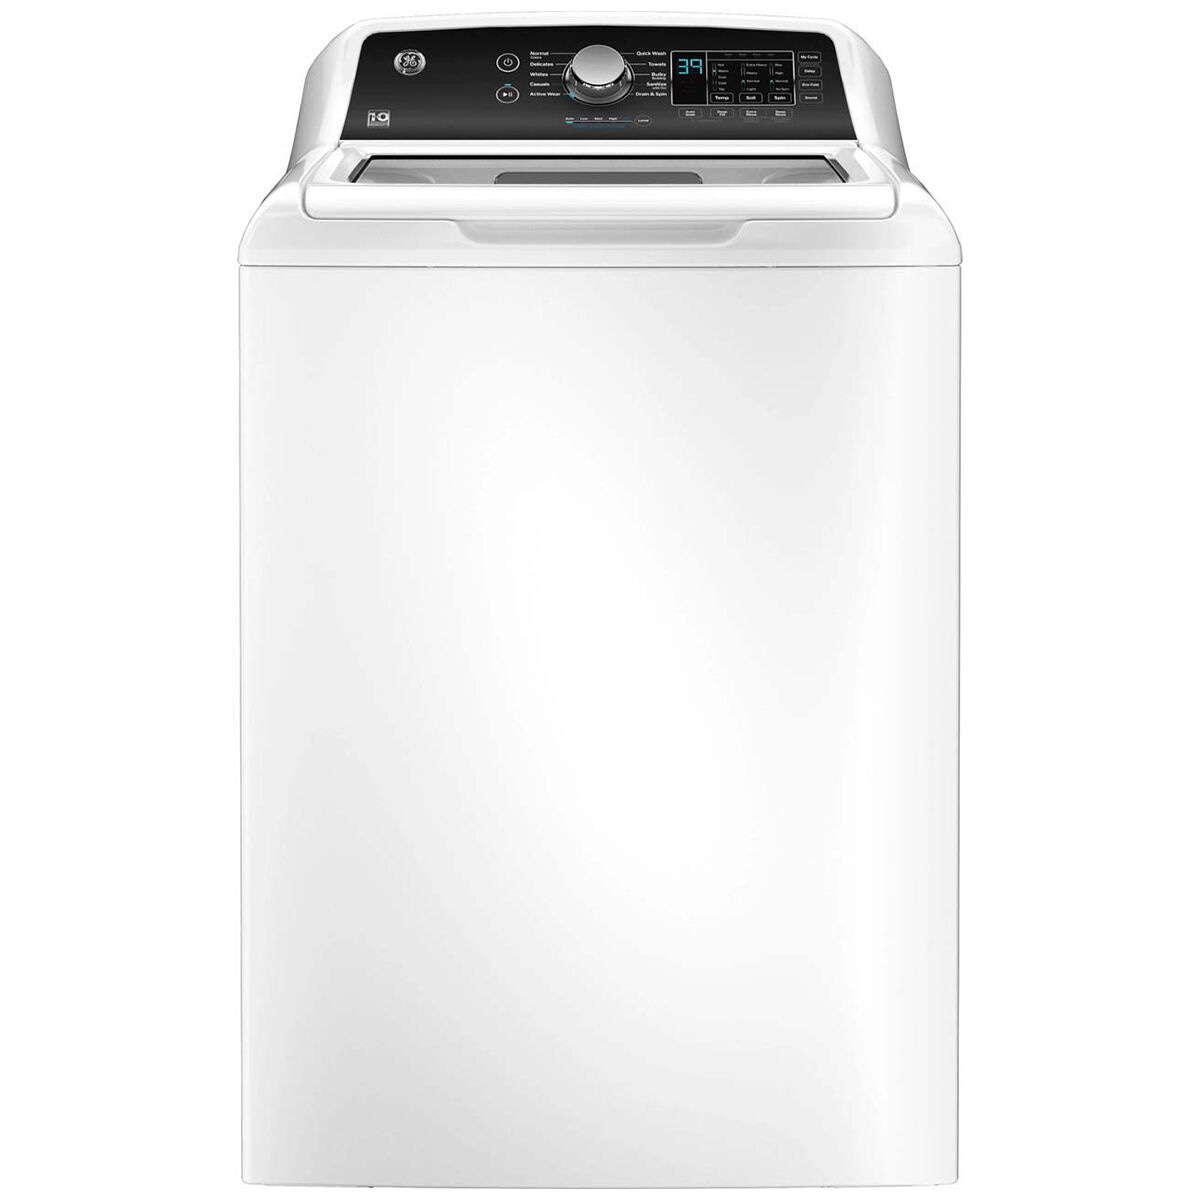 GE 27 in. 4.5 cu. ft. Top Load Washer with Agitator & Sanitize 